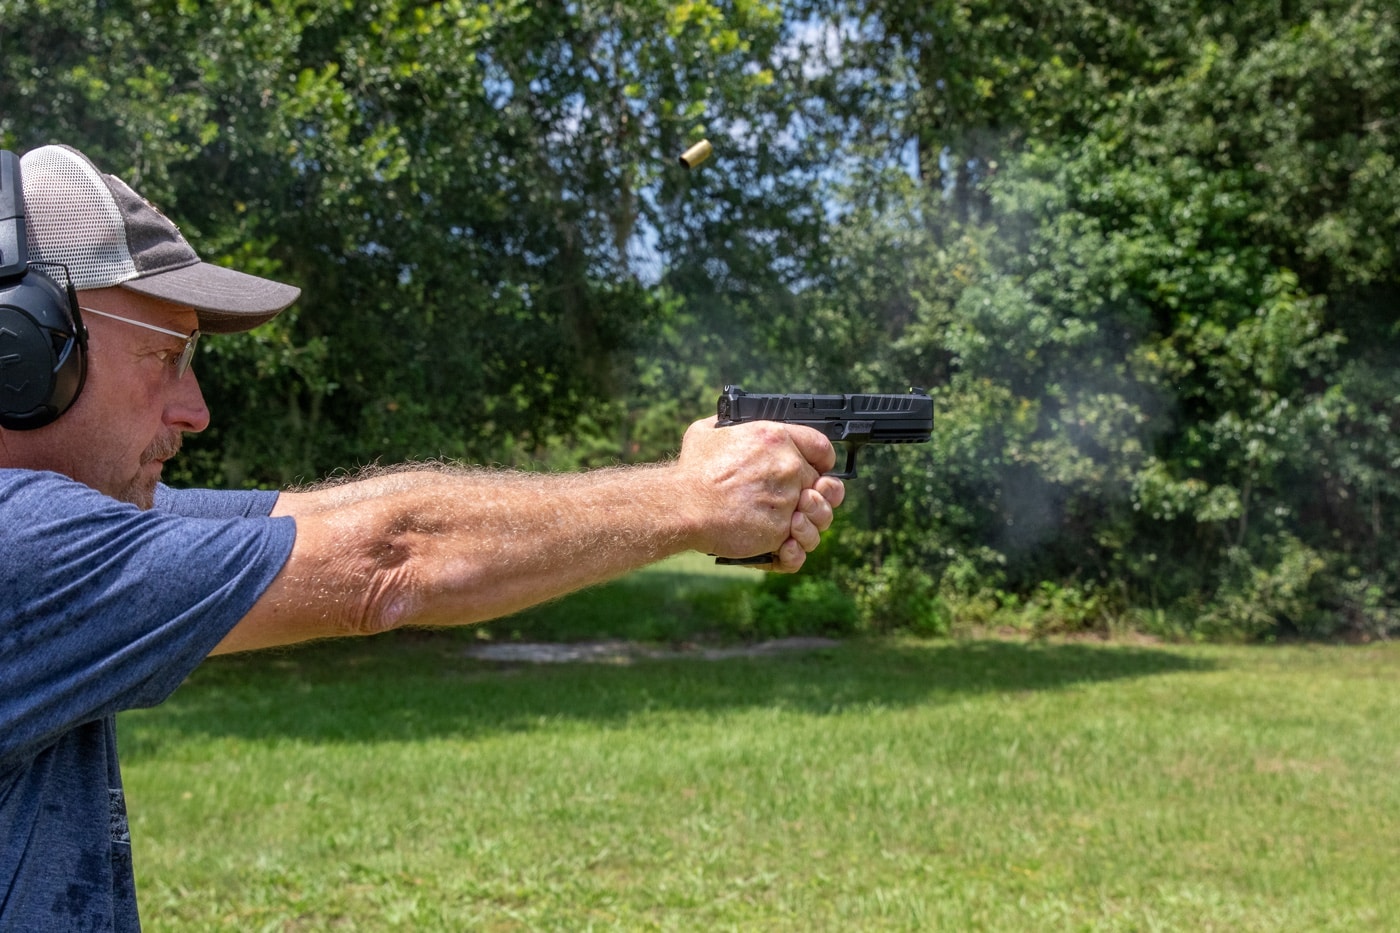 State and regional shooting champion John Strayer tests the author's Echelon. The muzzle is already back on target with a spent casing in air. He left the test planning to buy an Echelon. The frame texture helps provide a good grip. It is the same texture as the company uses on the Hellcat.